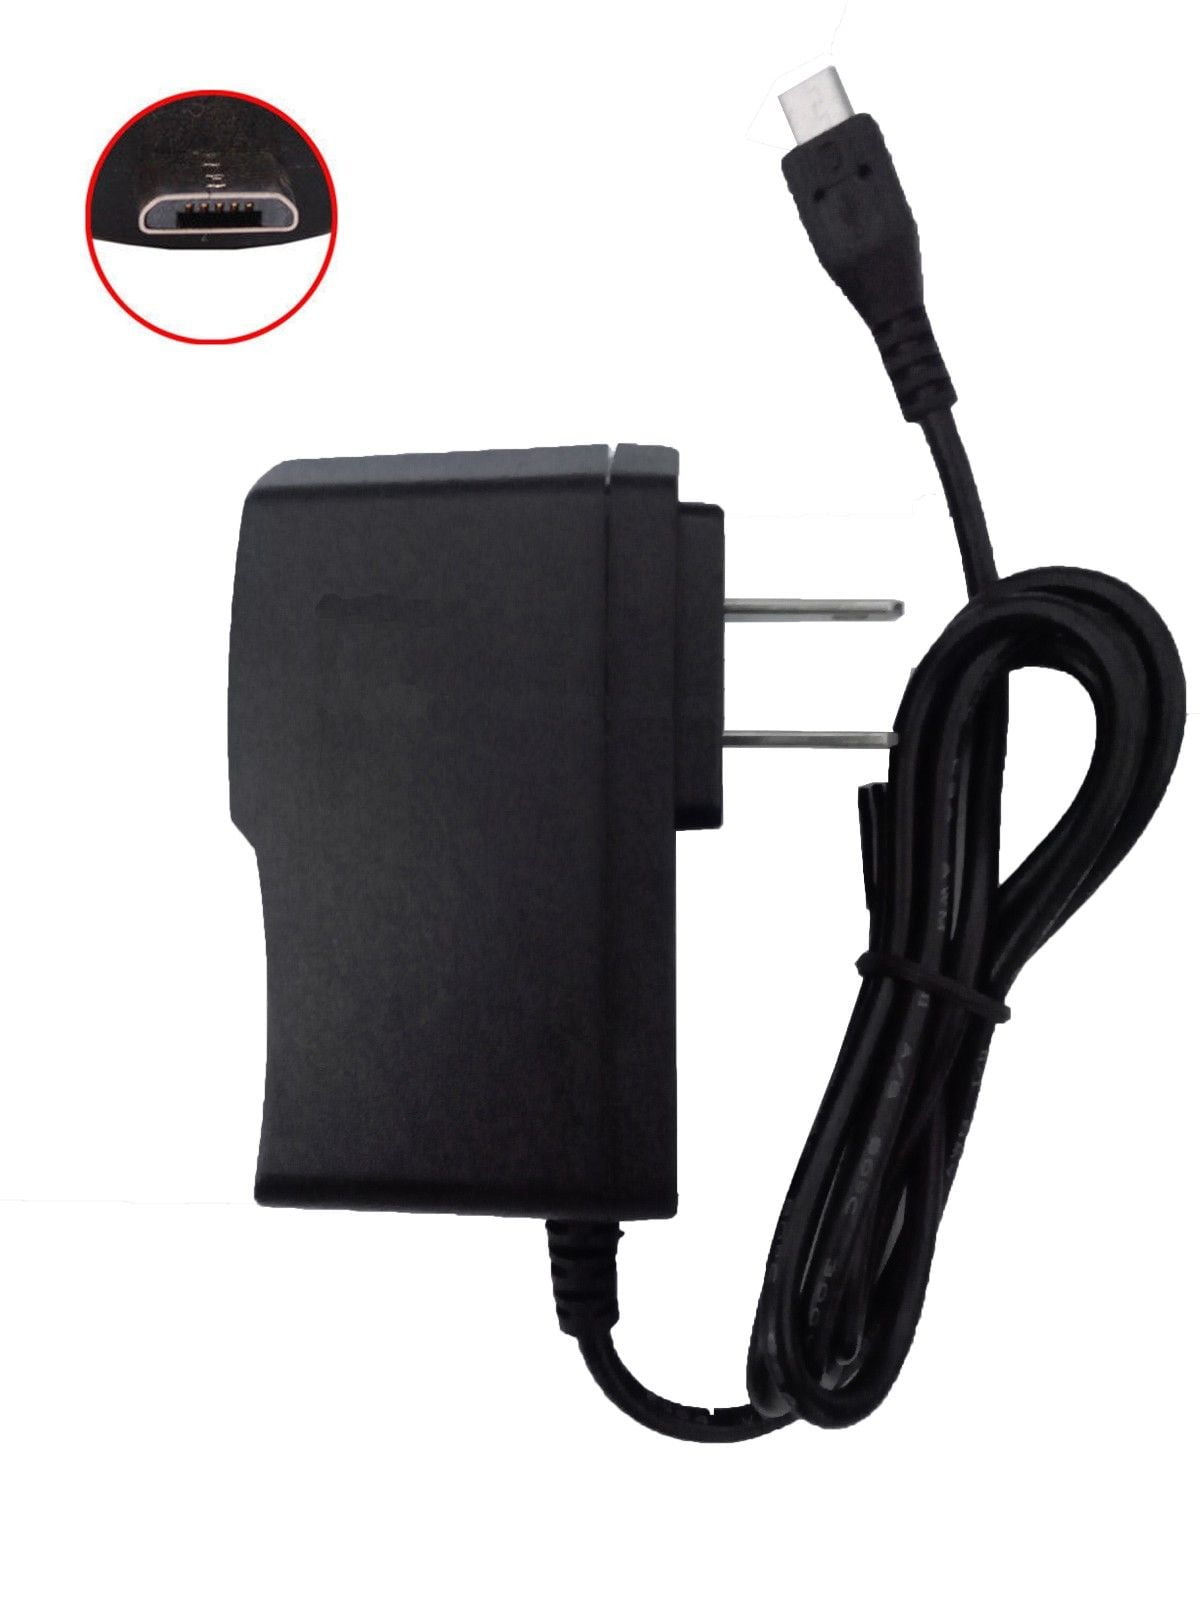 Amazon Micro USB For Android Amazon Kindle Fire HD HDX Tablet Fast Charger Cable Lead 